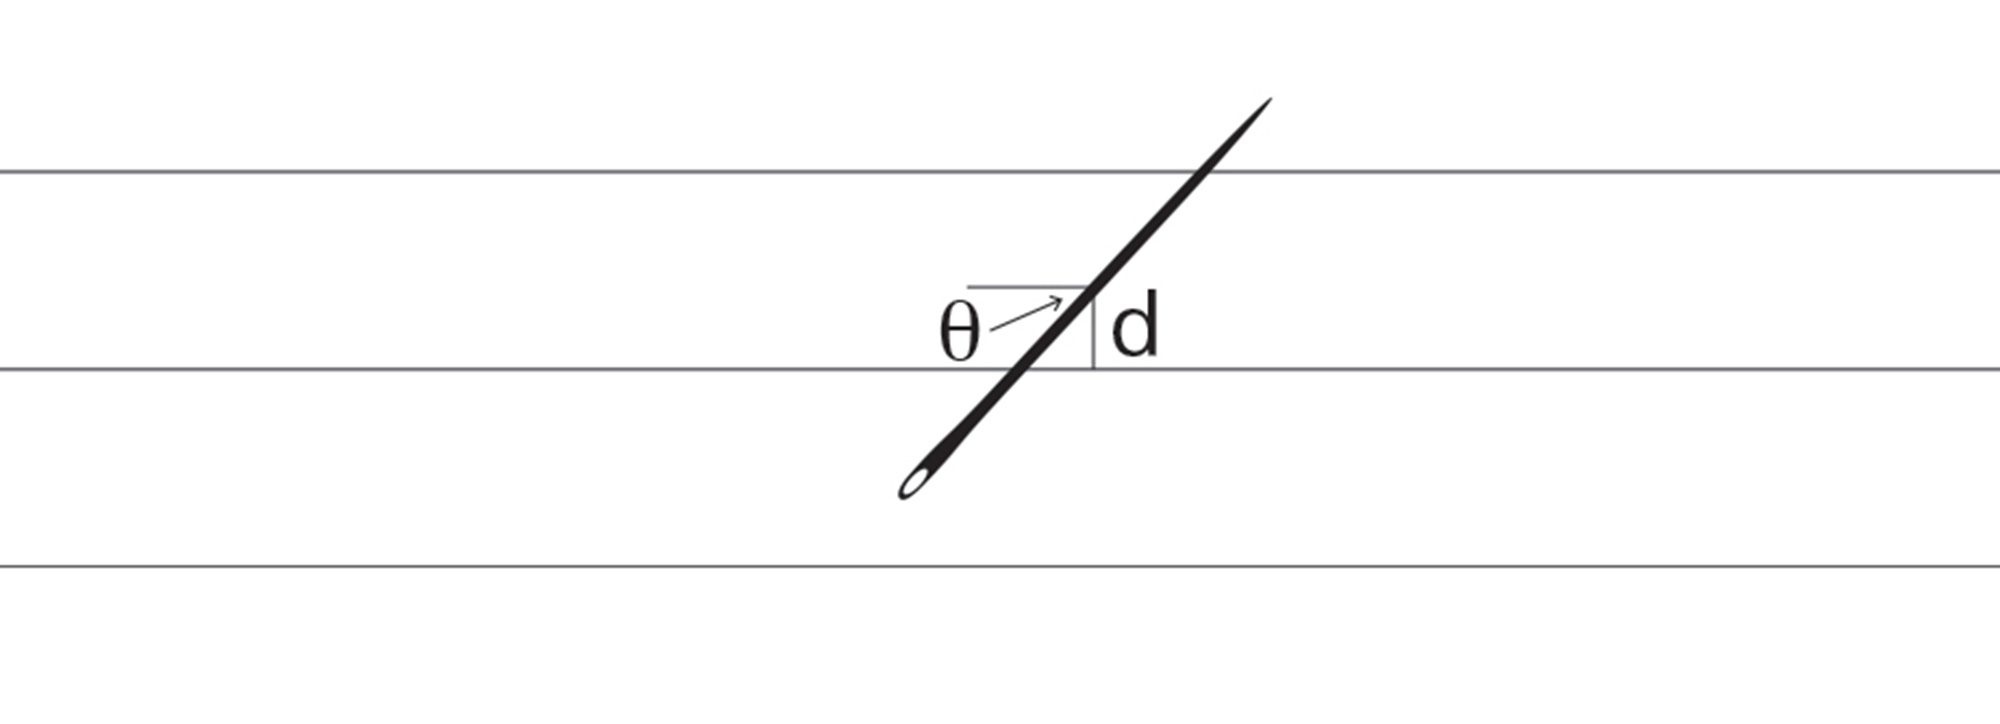 A digital illustration of how to characterize the position of a needle by marking its d and theta values.